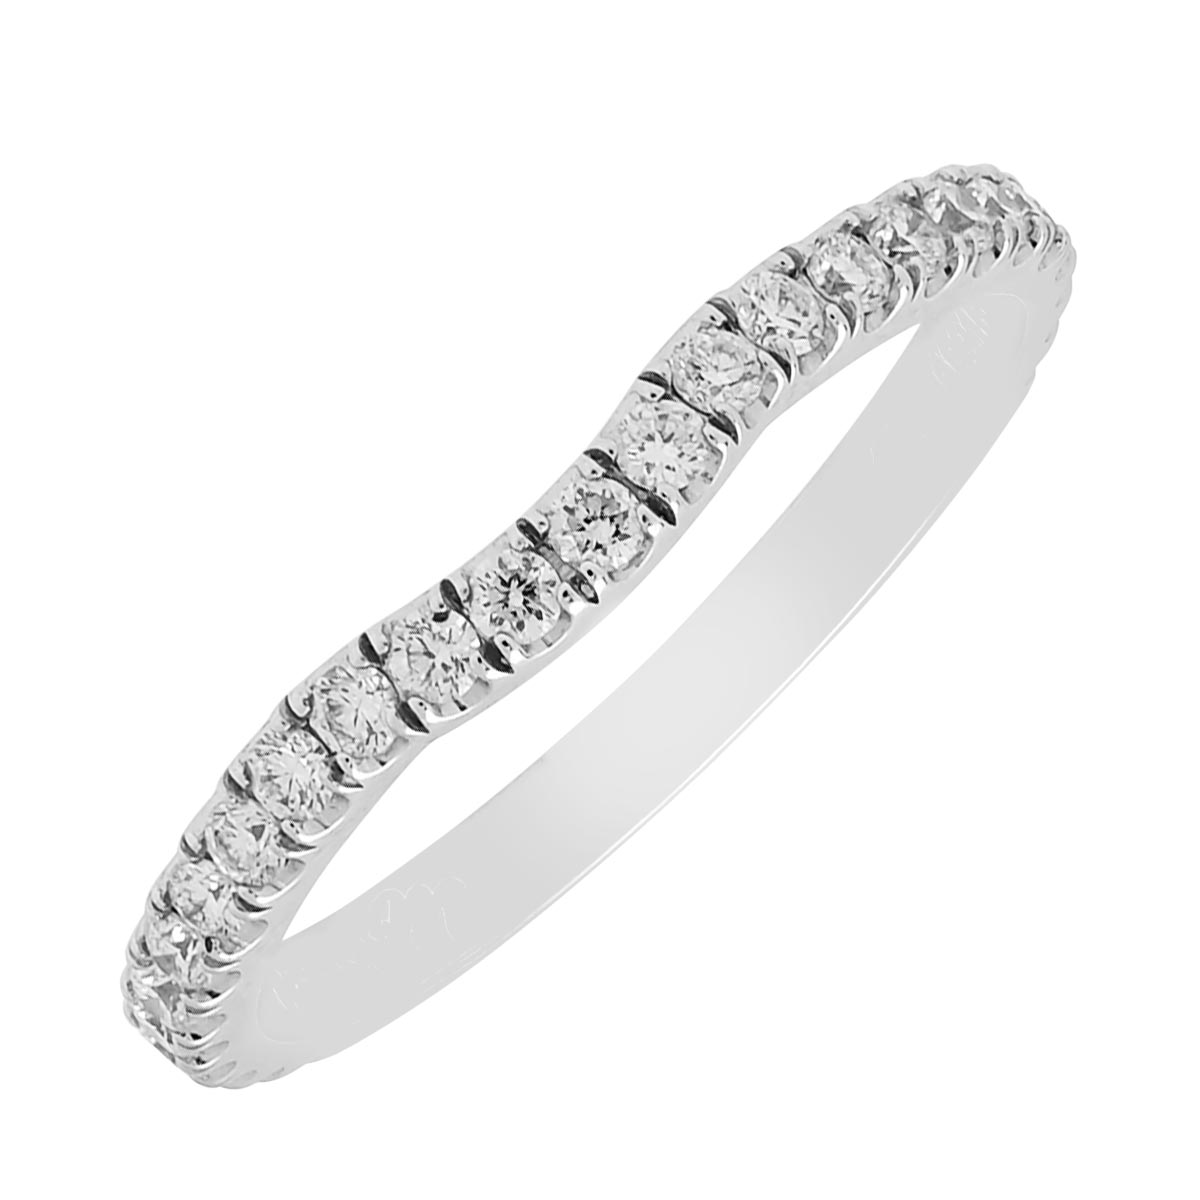 Michael M Diamond Curved Wedding Band in 18kt White Gold (1/3ct tw)